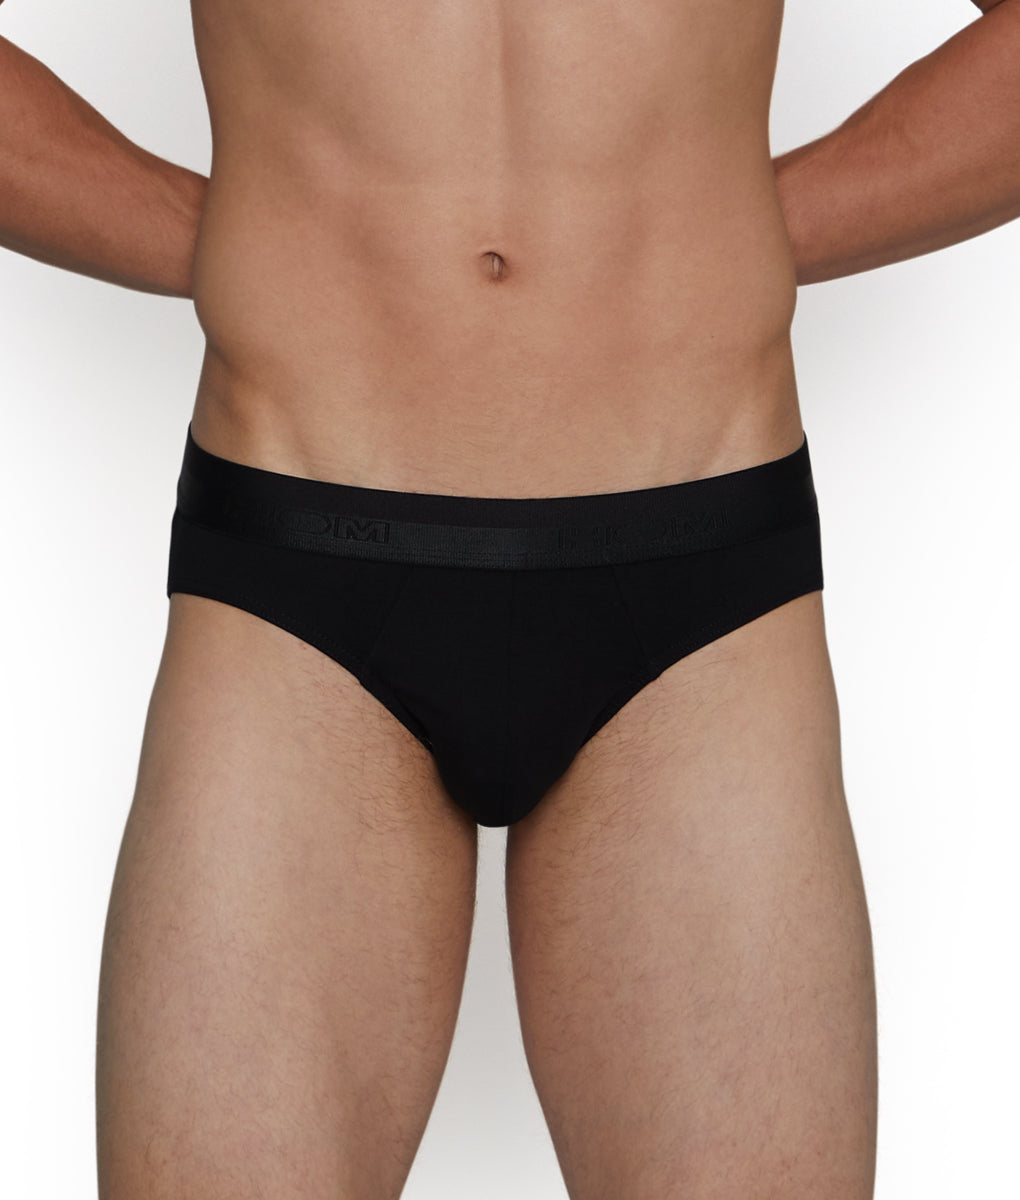 HOM Micro briefs in black from the Premium Cotton collection